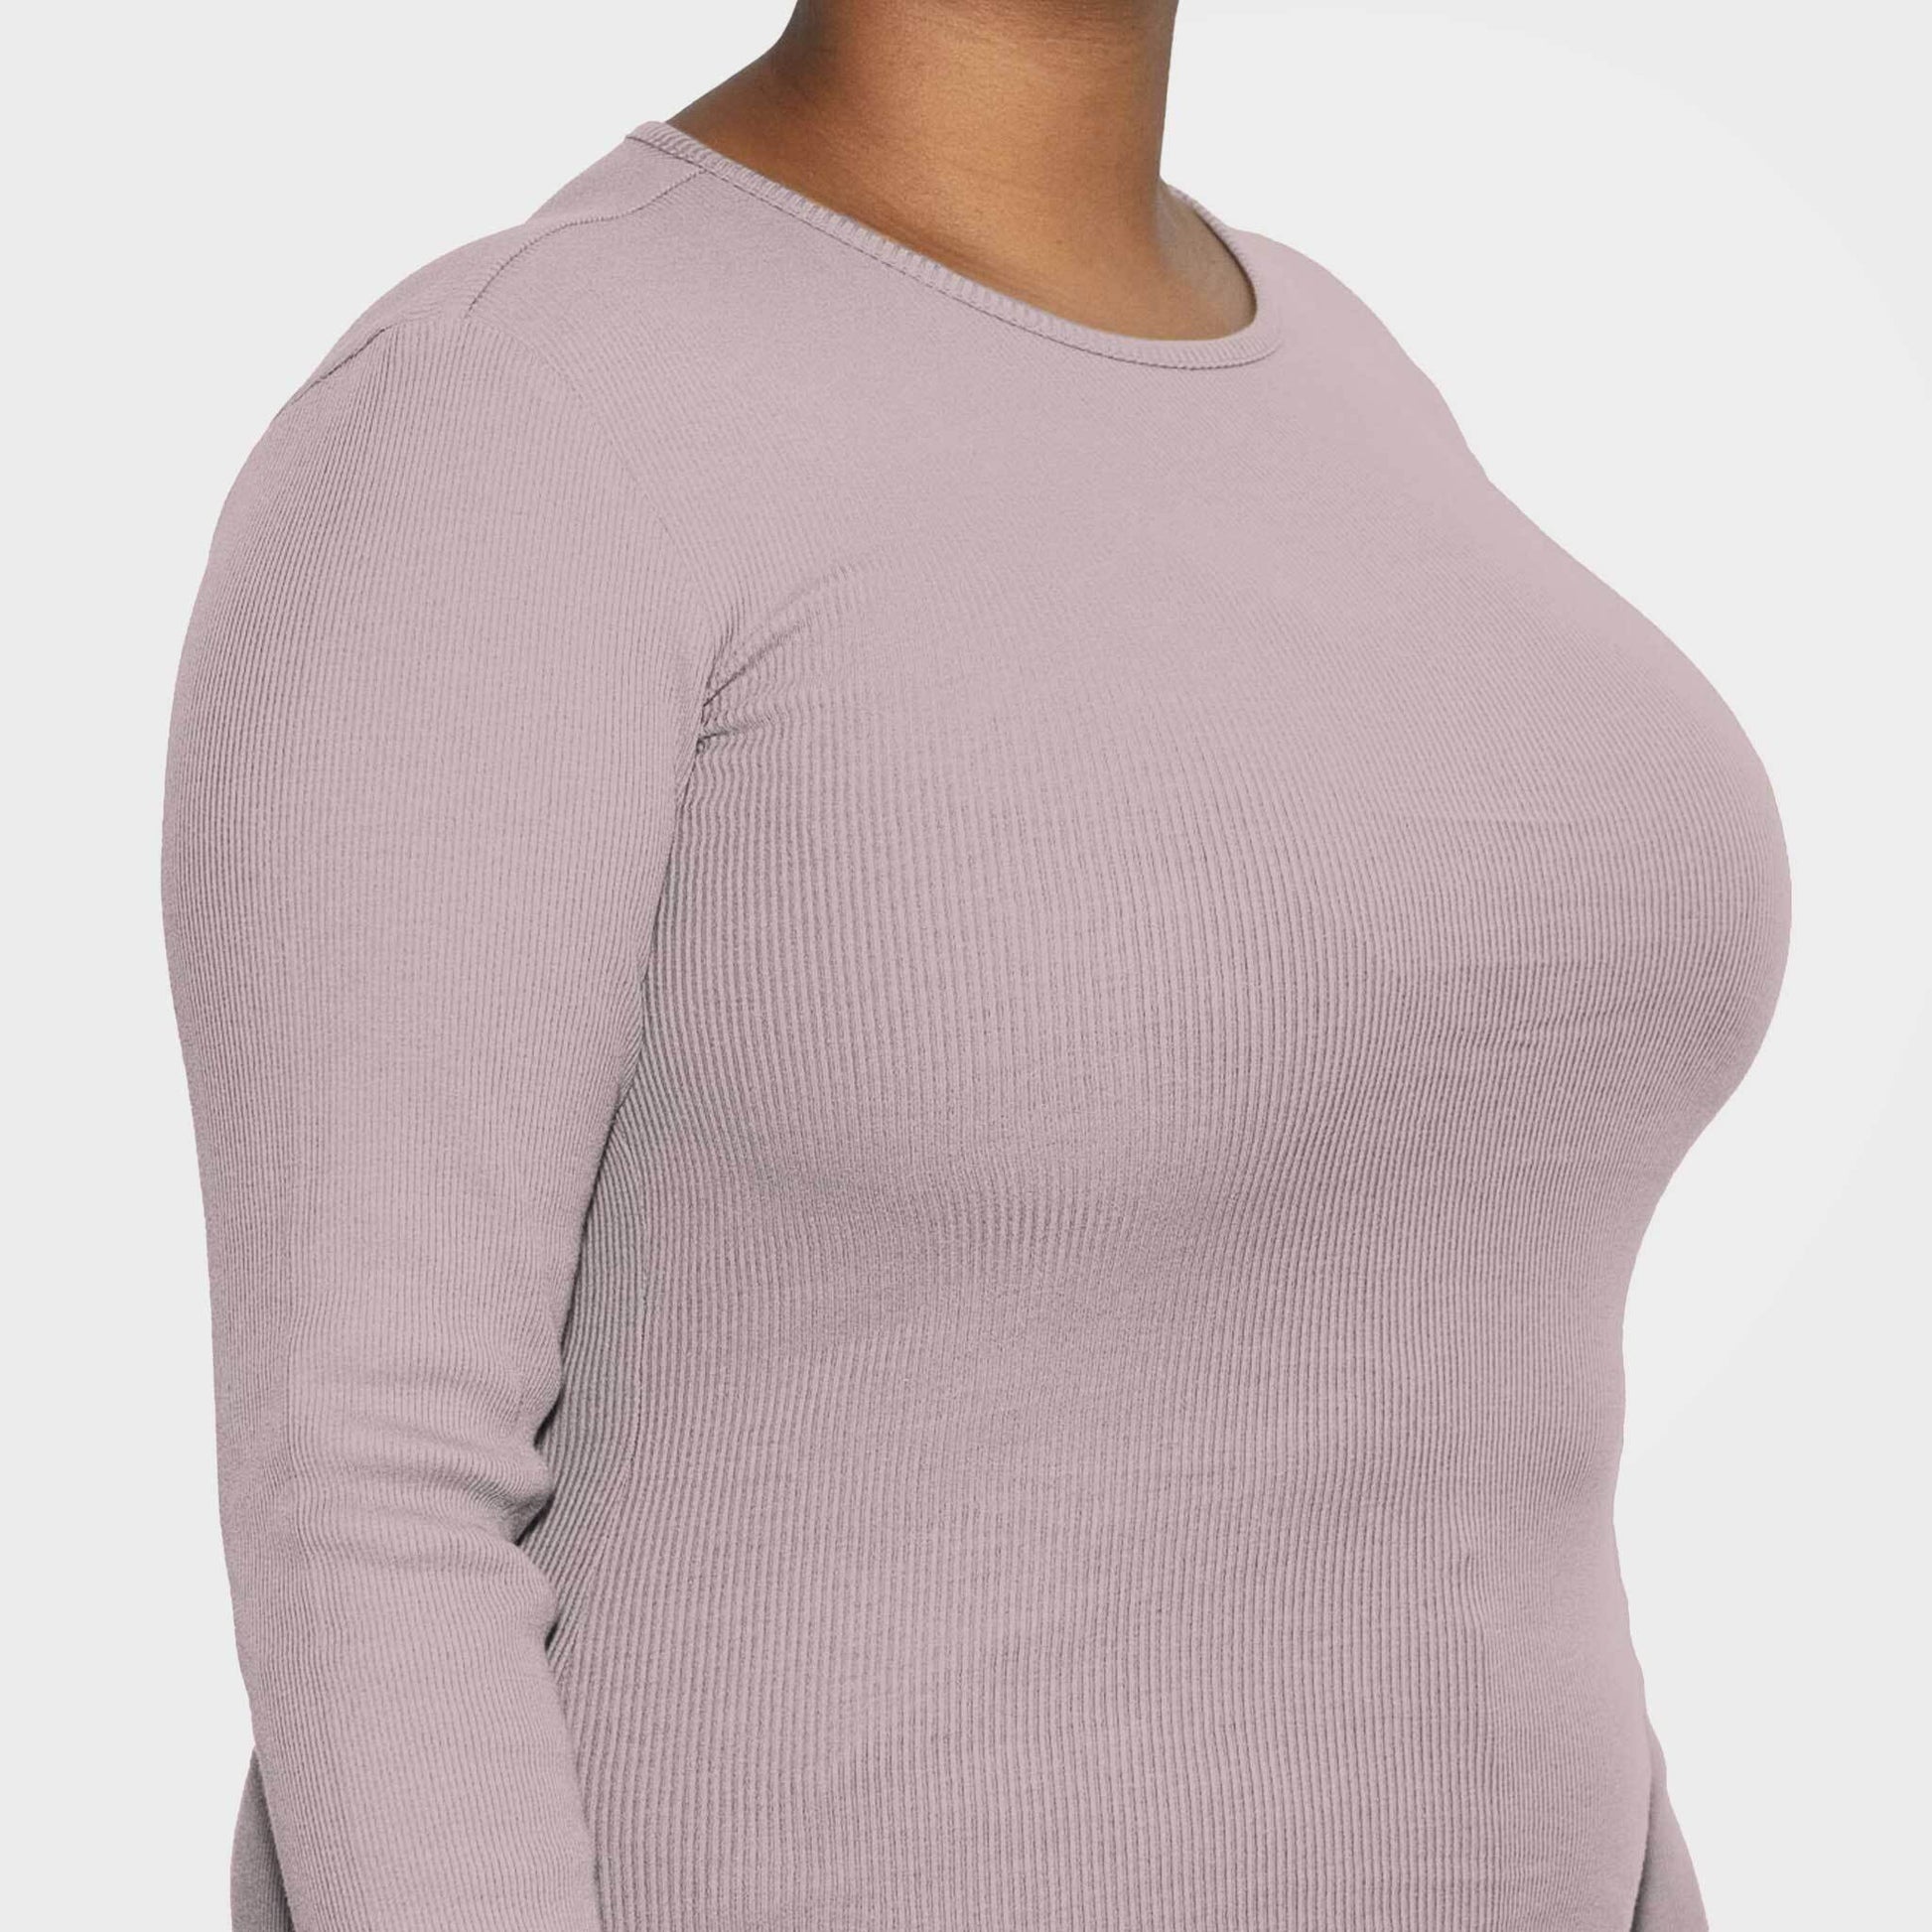 Women’s Recycled Cotton Rib Long Sleeve Top, Sand